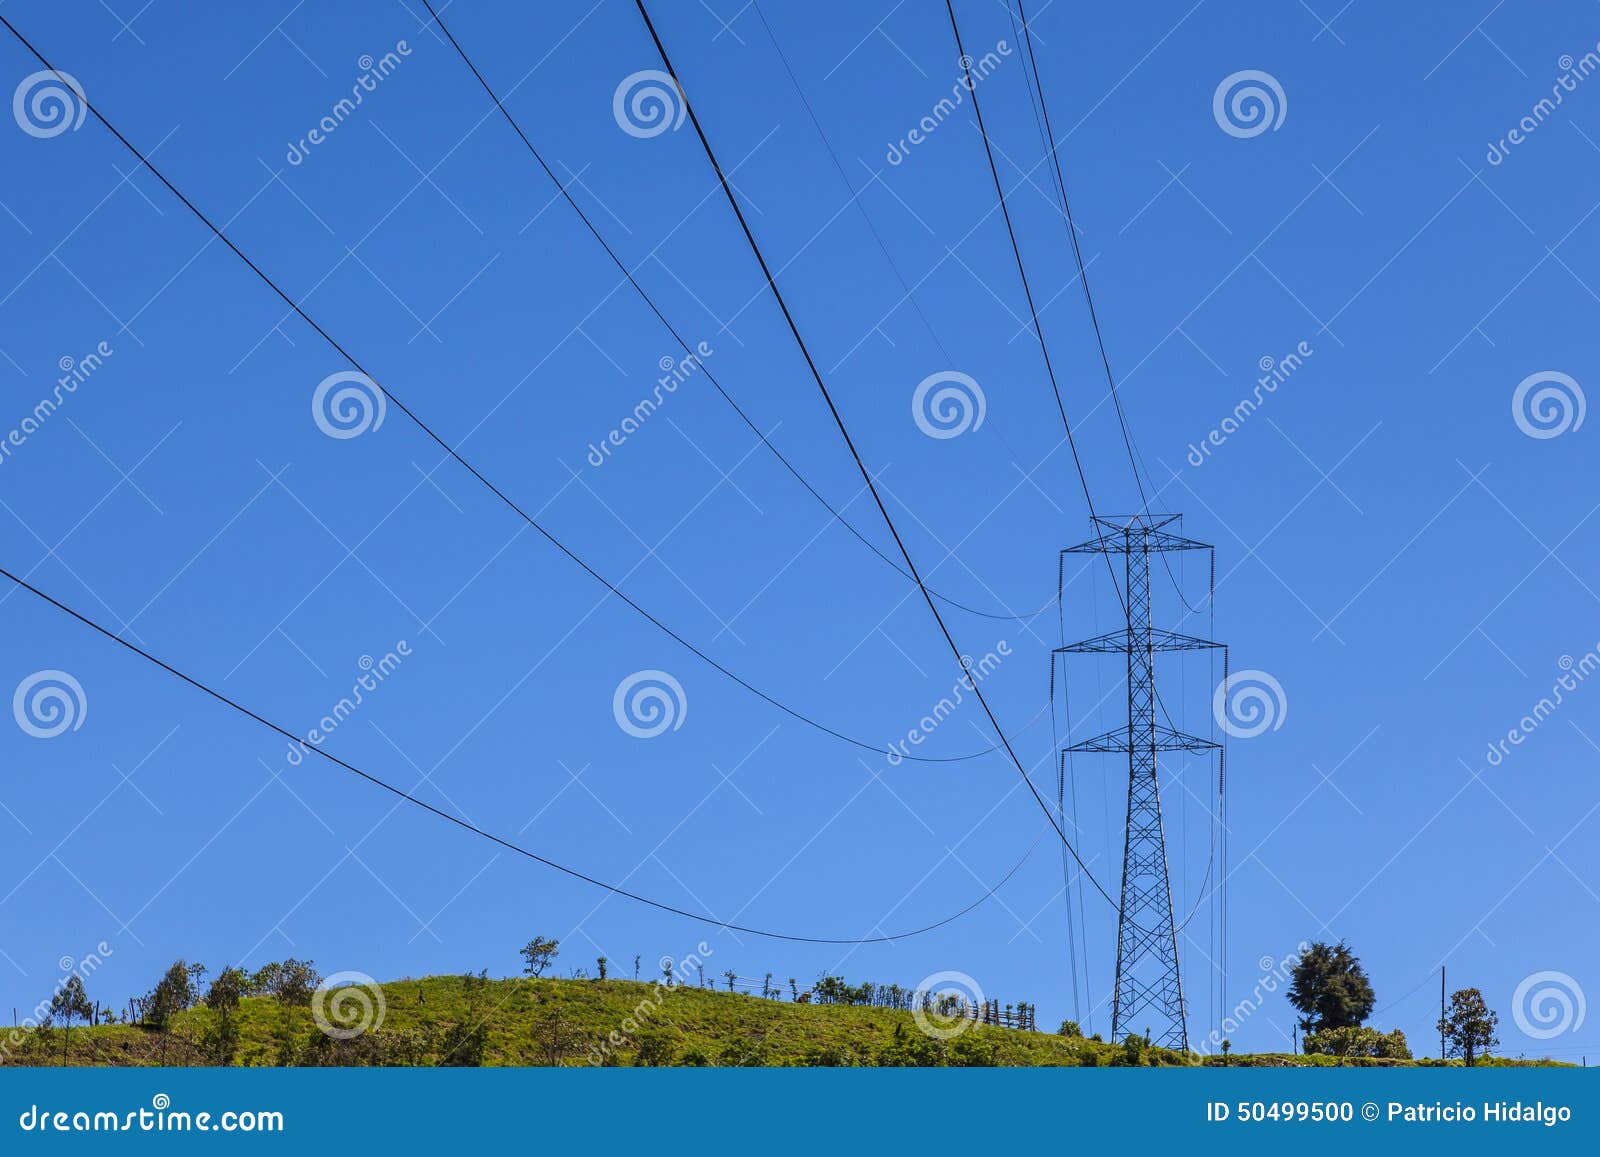 electrical powerlines on a hill before a blue sky